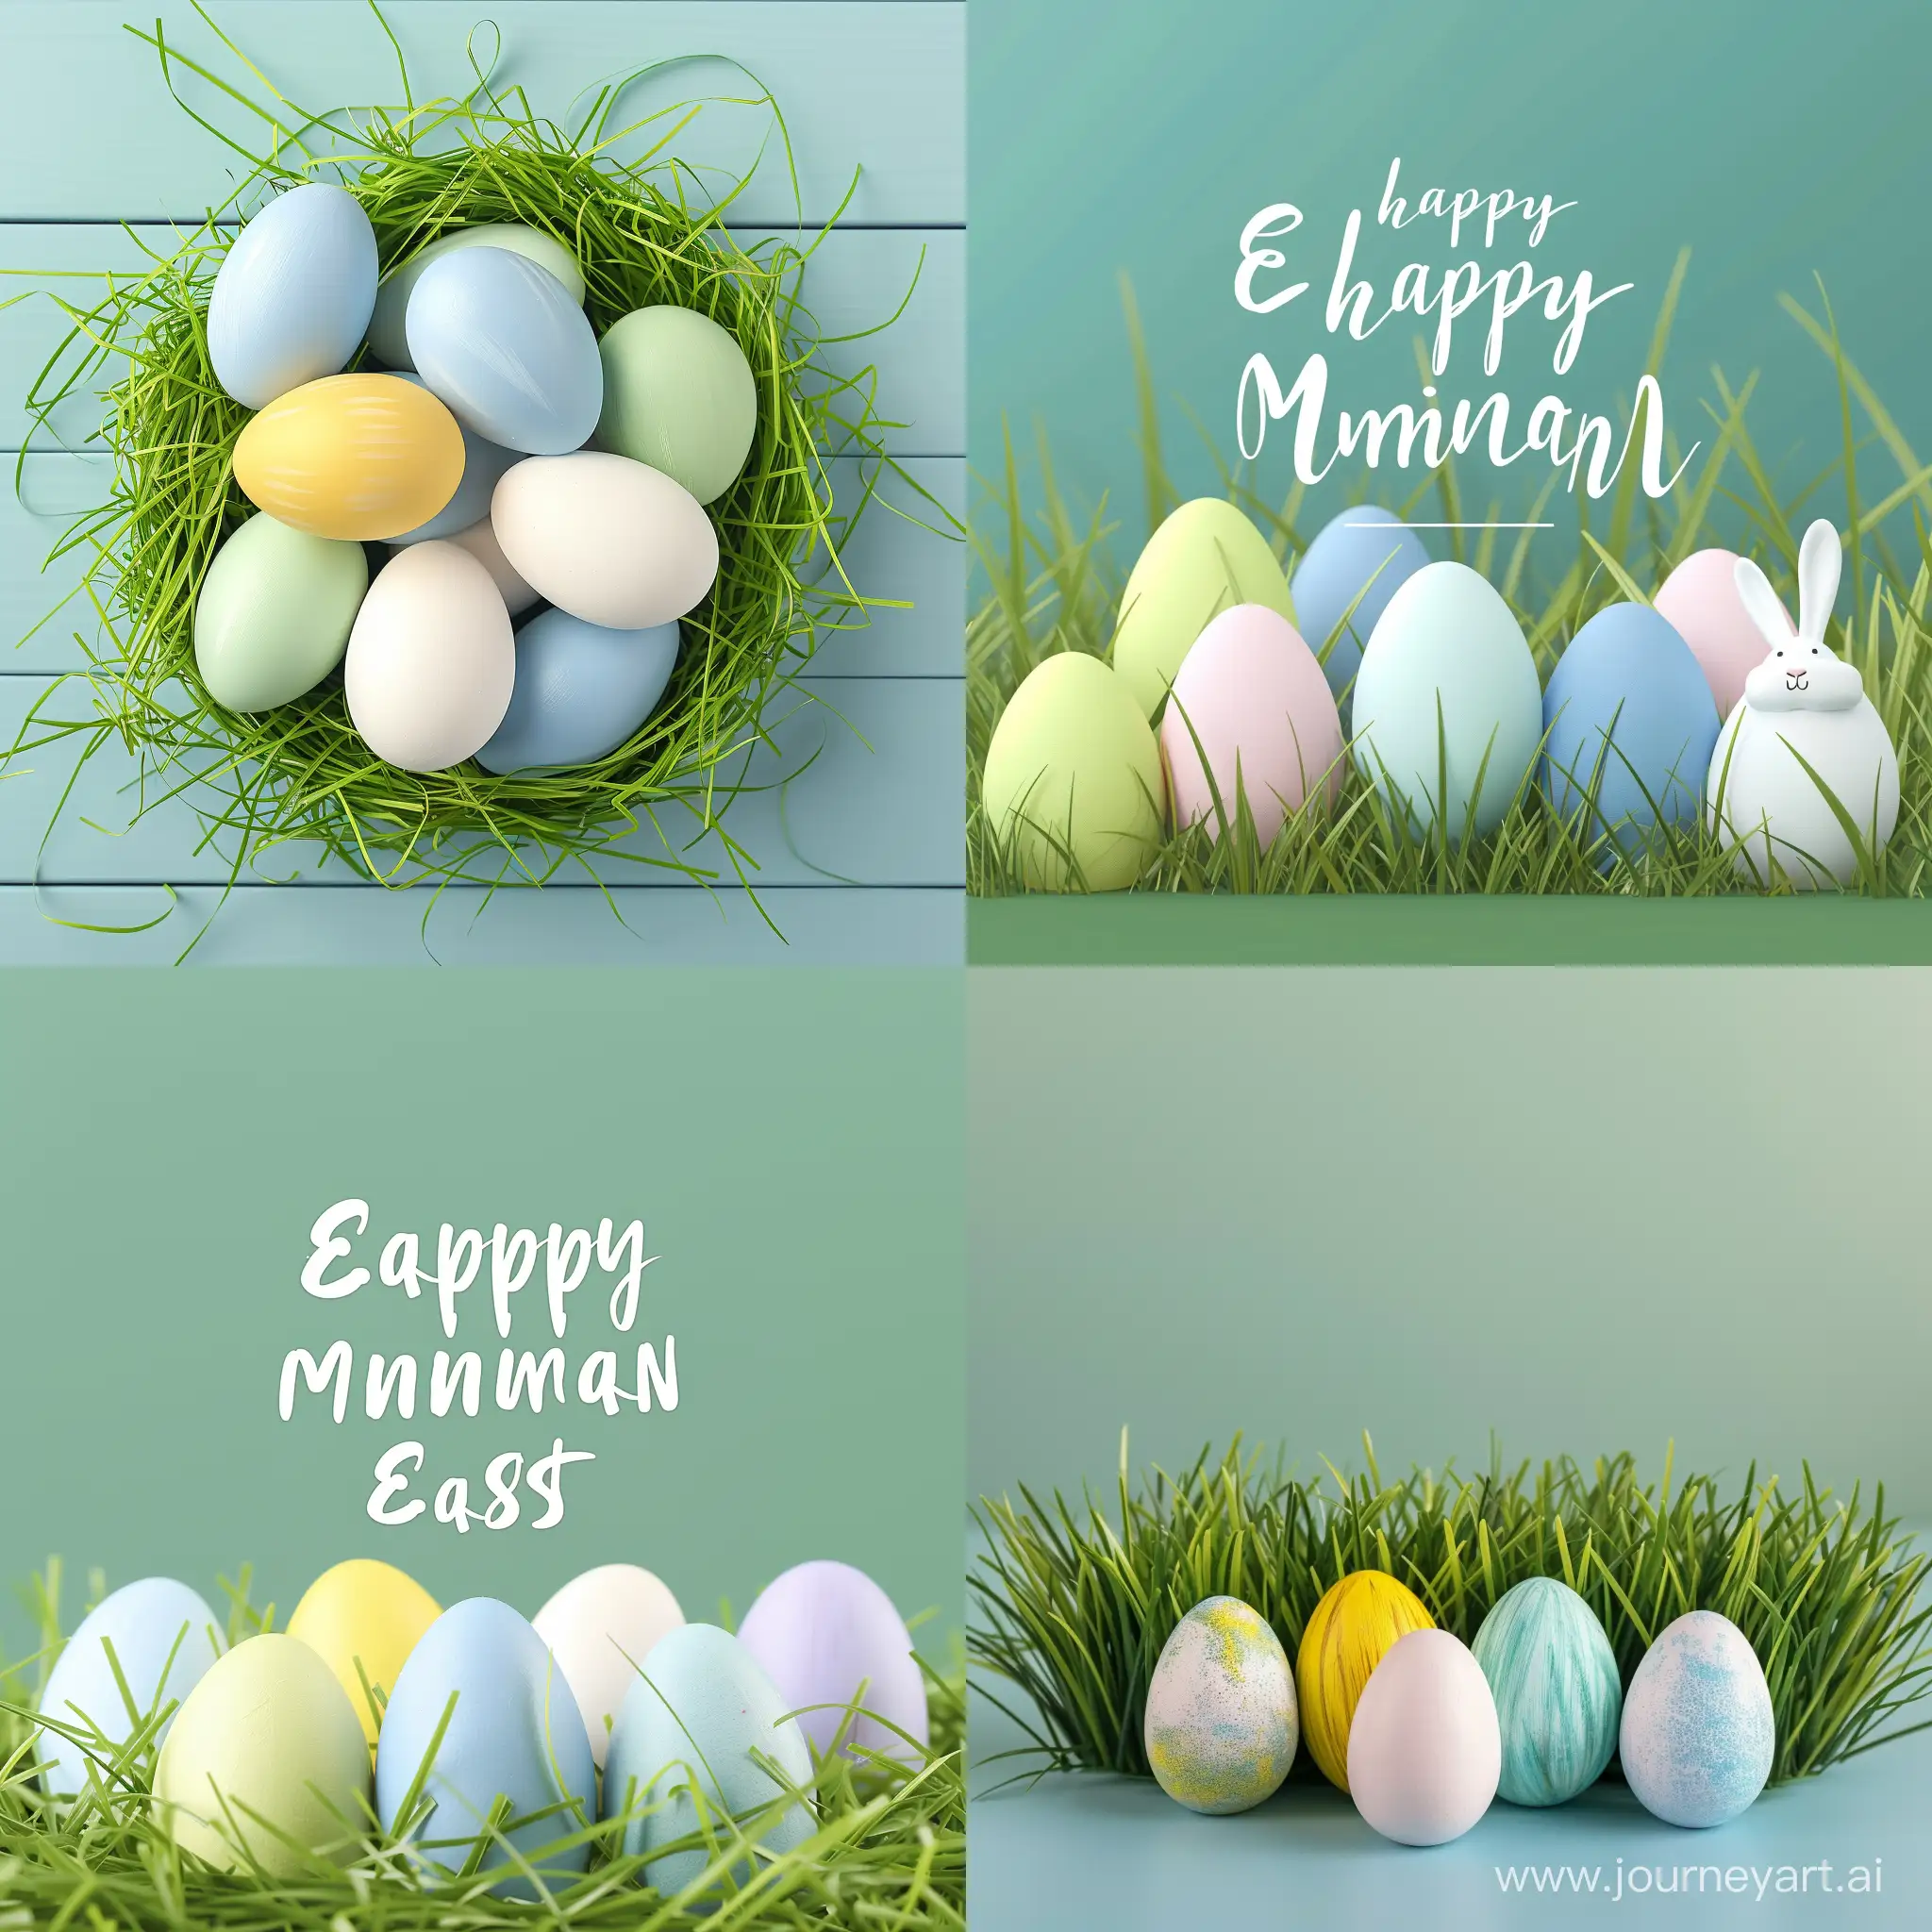 Tranquil-Easter-Egg-Celebration-in-Pastel-Grass-Renewal-and-Hope